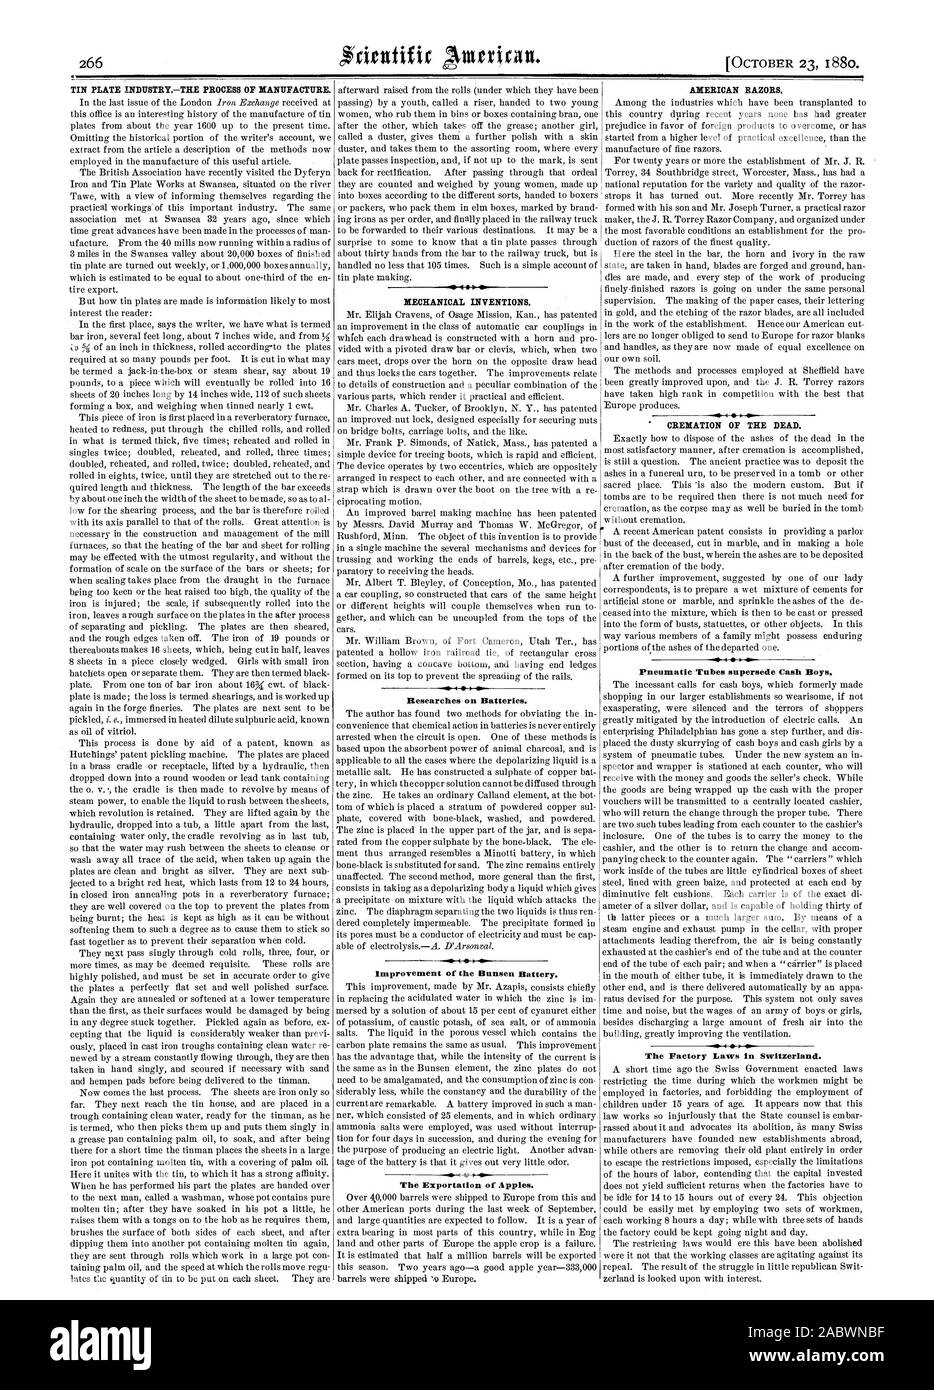 MECHANICAL INVENTIONS. Researches on Batteries. Improvement of the Bunsen Battery. The Exportation of Apples. AMERICAN RAZORS. ' CREMATION OF THE DEAD. Pneumatic Tubes supersede Cash Boys. The Factory Laws in Switzerland. TIN PLATE INDUSTRYTHE PROCESS OF MANUFACTURE., scientific american, 1880-10-11 Stock Photo